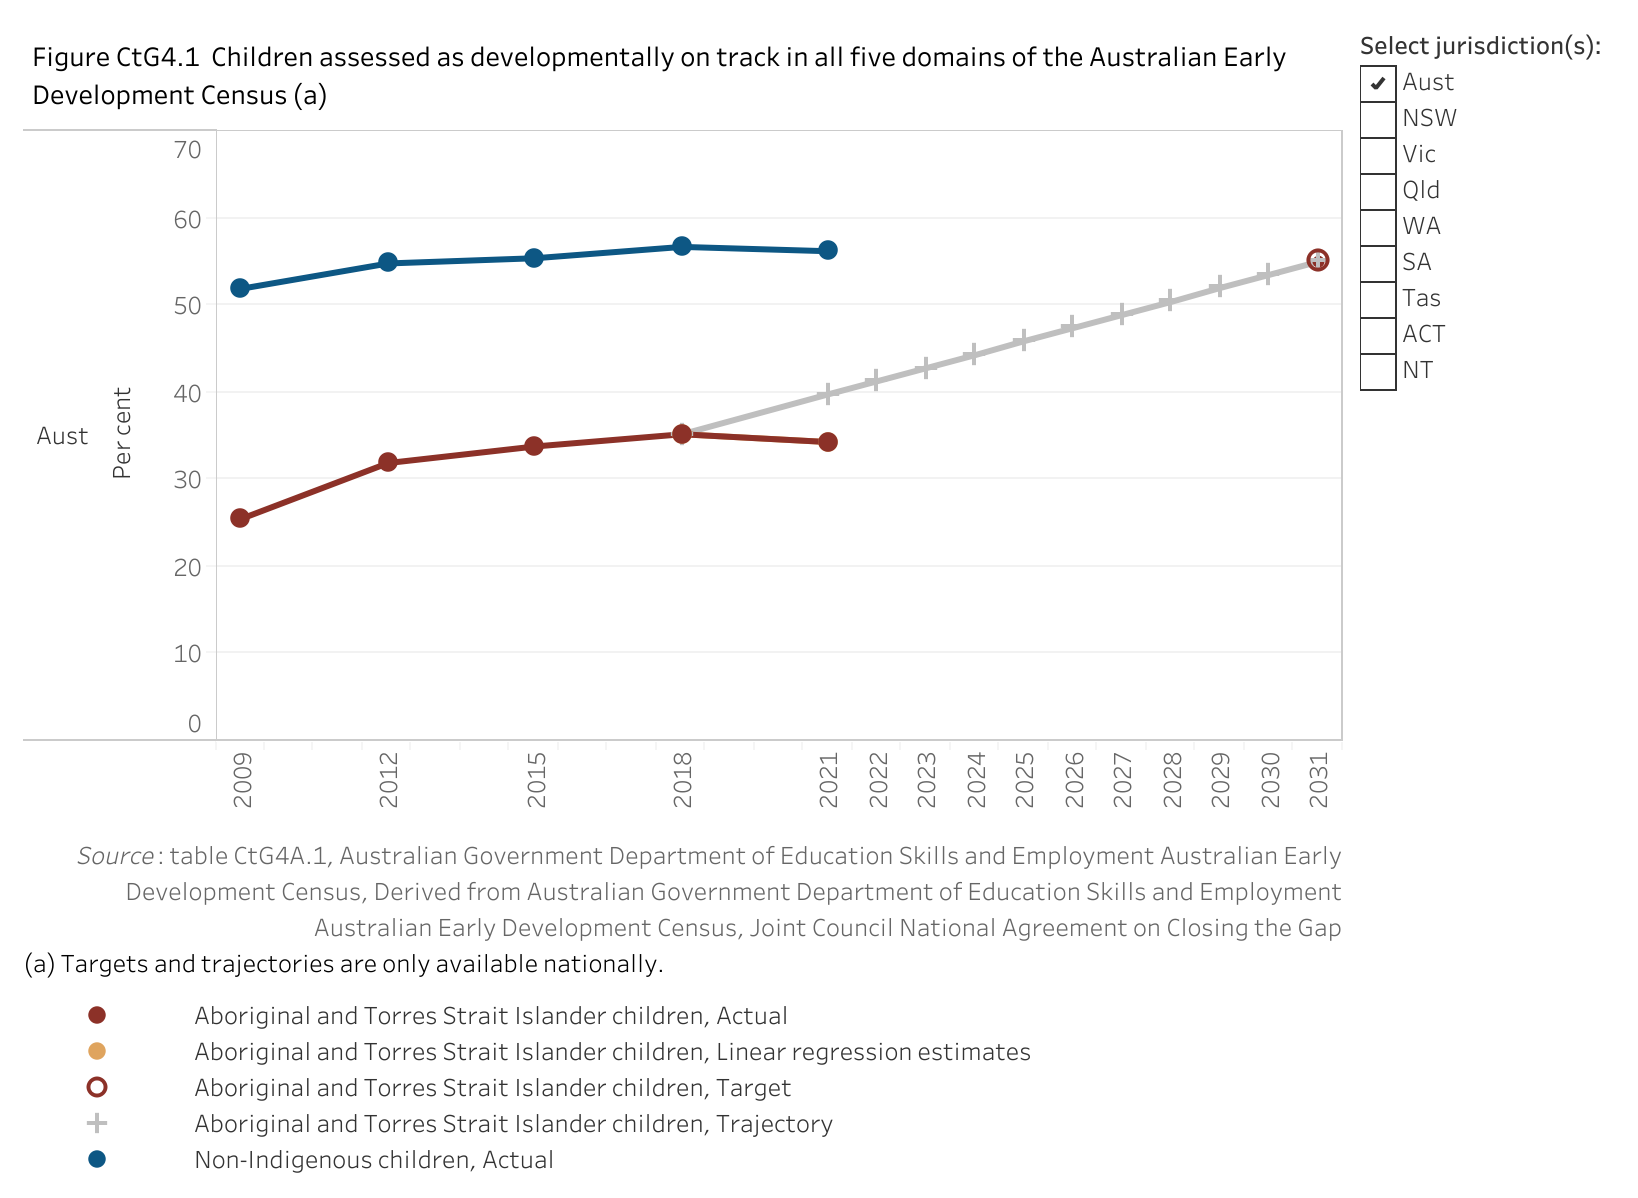 Figure CtG4.1. Line chart showing the proportion of Aboriginal and Torres Strait Islander children commencing school and non-Indigenous children commencing school who were assessed as being developmentally on track in all five Australian Early Development Census domains. Along with these proportions, a linear regression is displayed that shows the data trend for the target. The aim under Closing the Gap is to increase the proportion for Aboriginal and Torres Strait Islander children from a 2018 baseline value of 35.2 per cent to a target value of 55 per cent by 2031.